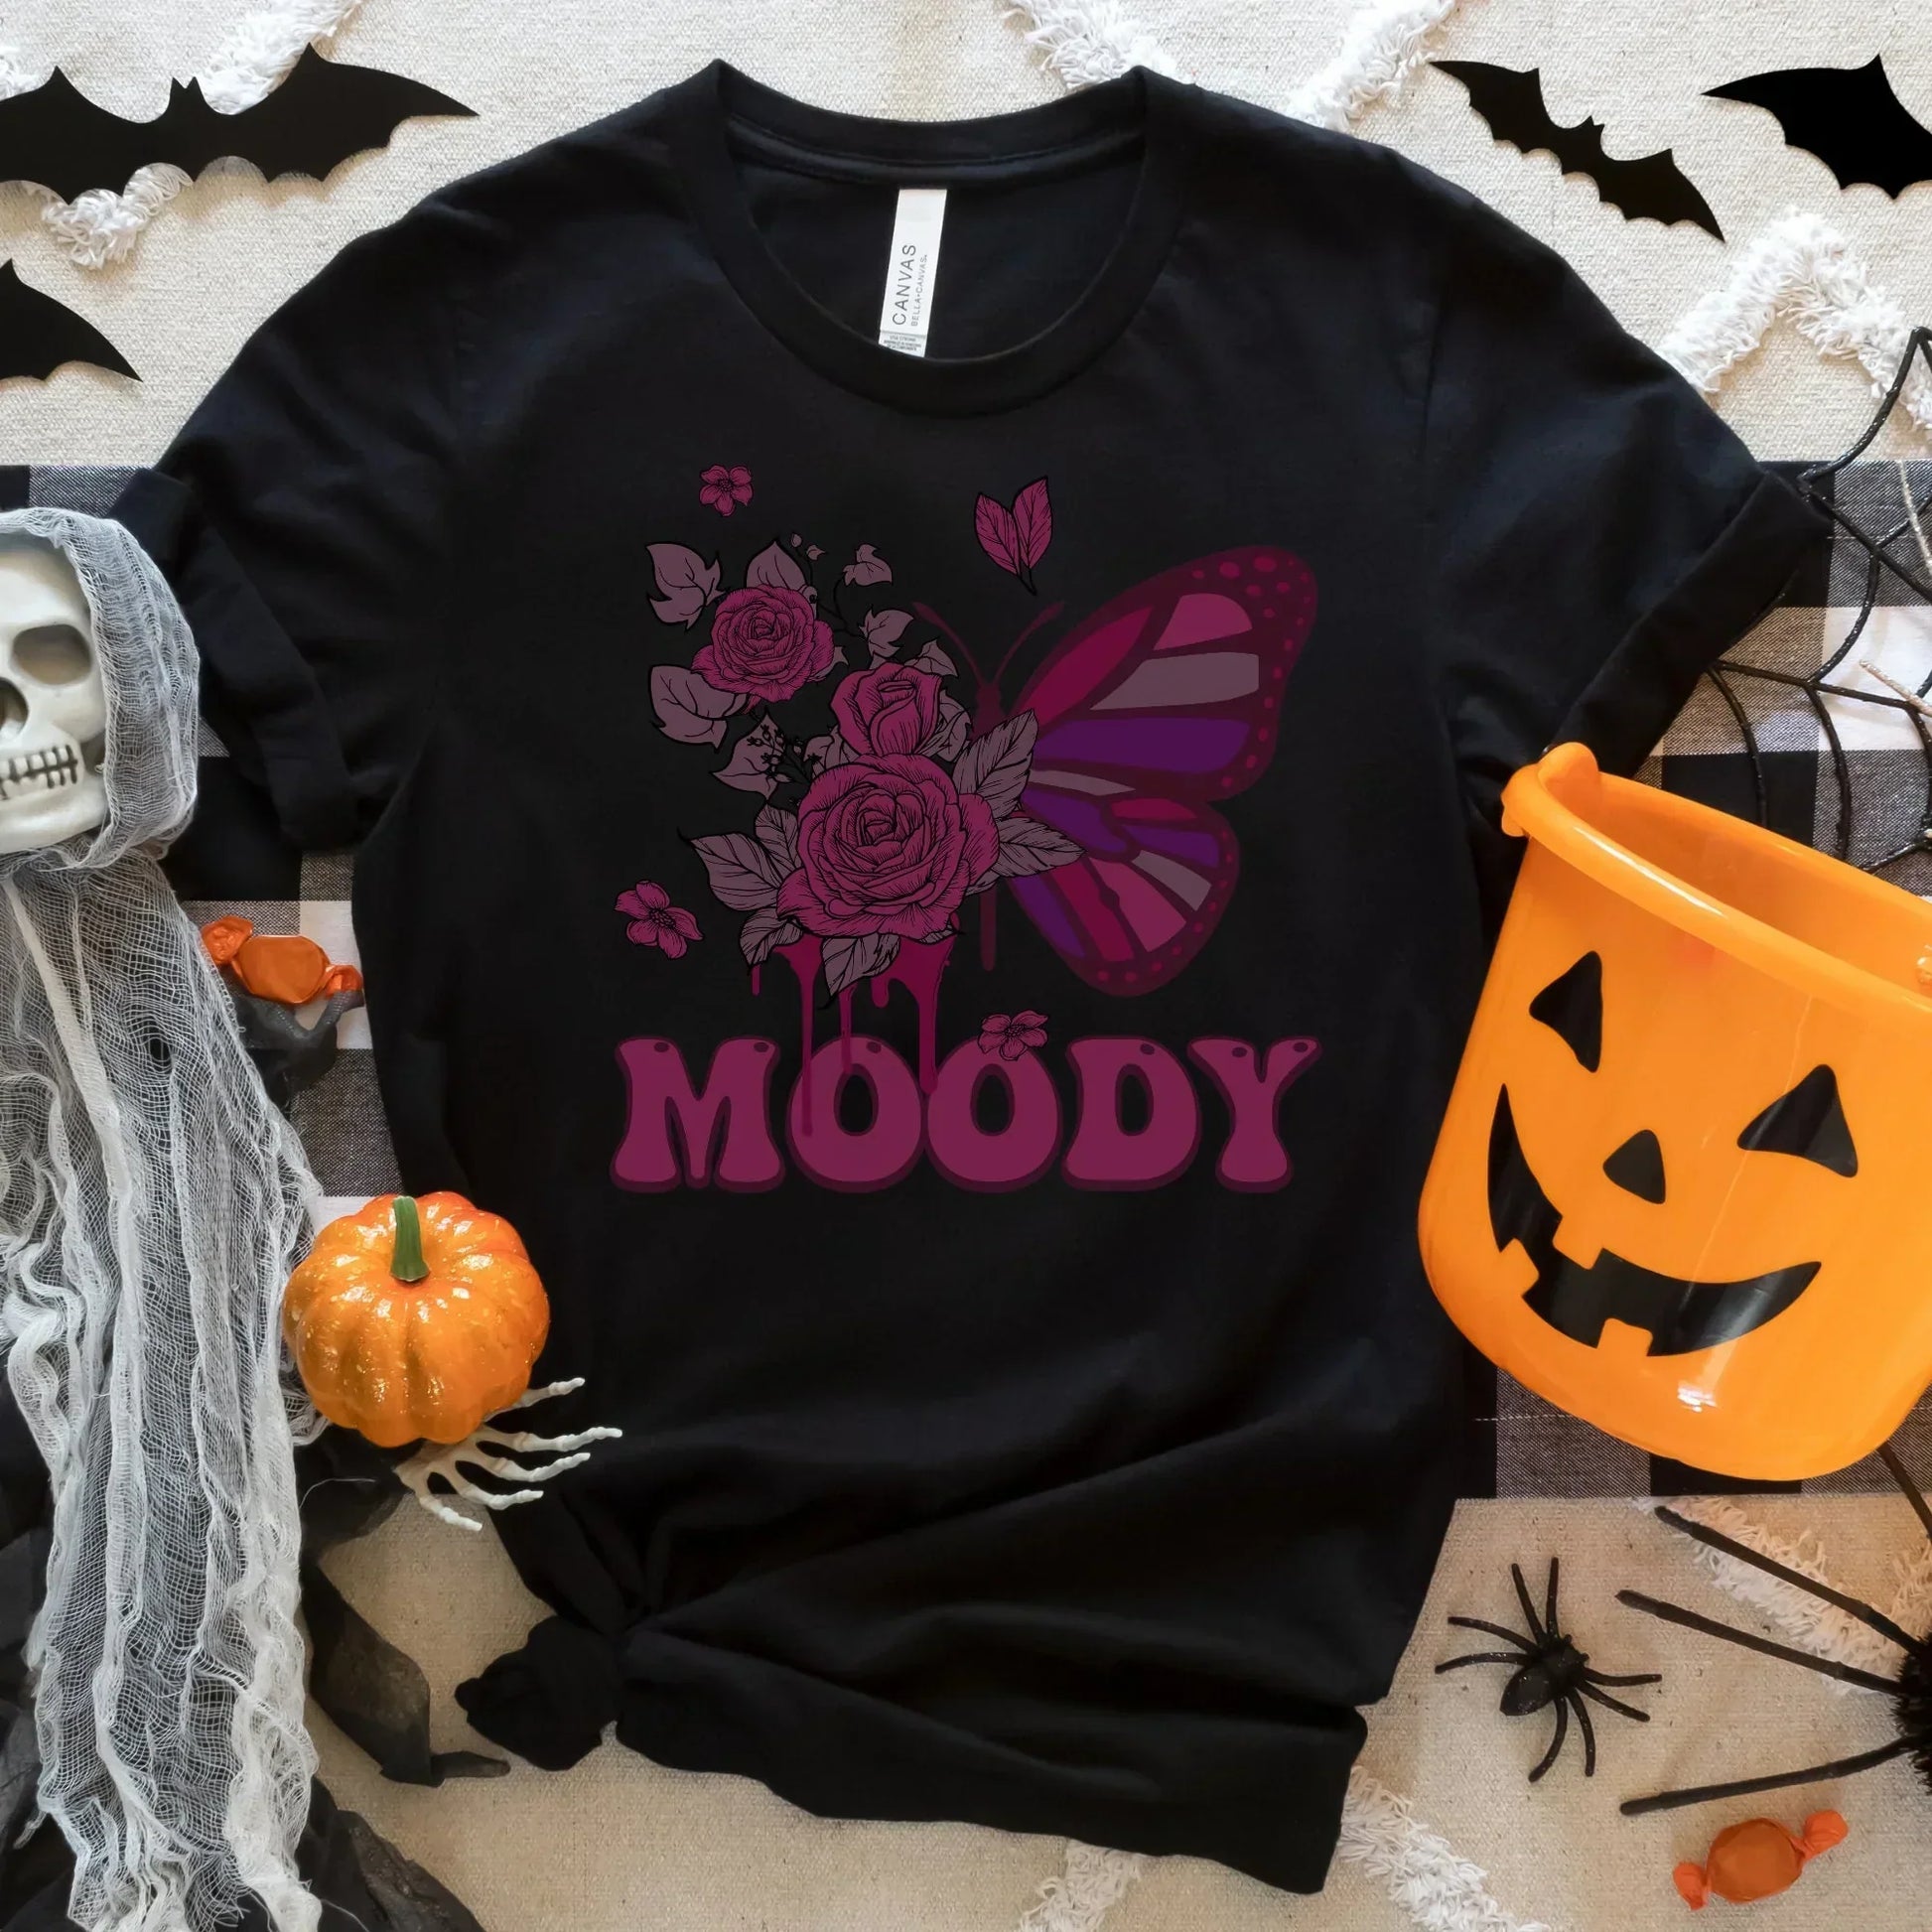 Gothic Shirt, Goth Clothing, Moody Tshirt, Spooky Halloween Sweatshirt, Witchy Vibes, Butterfly Shirt, Moon Shirt, Magical Witch Shirt, EMO